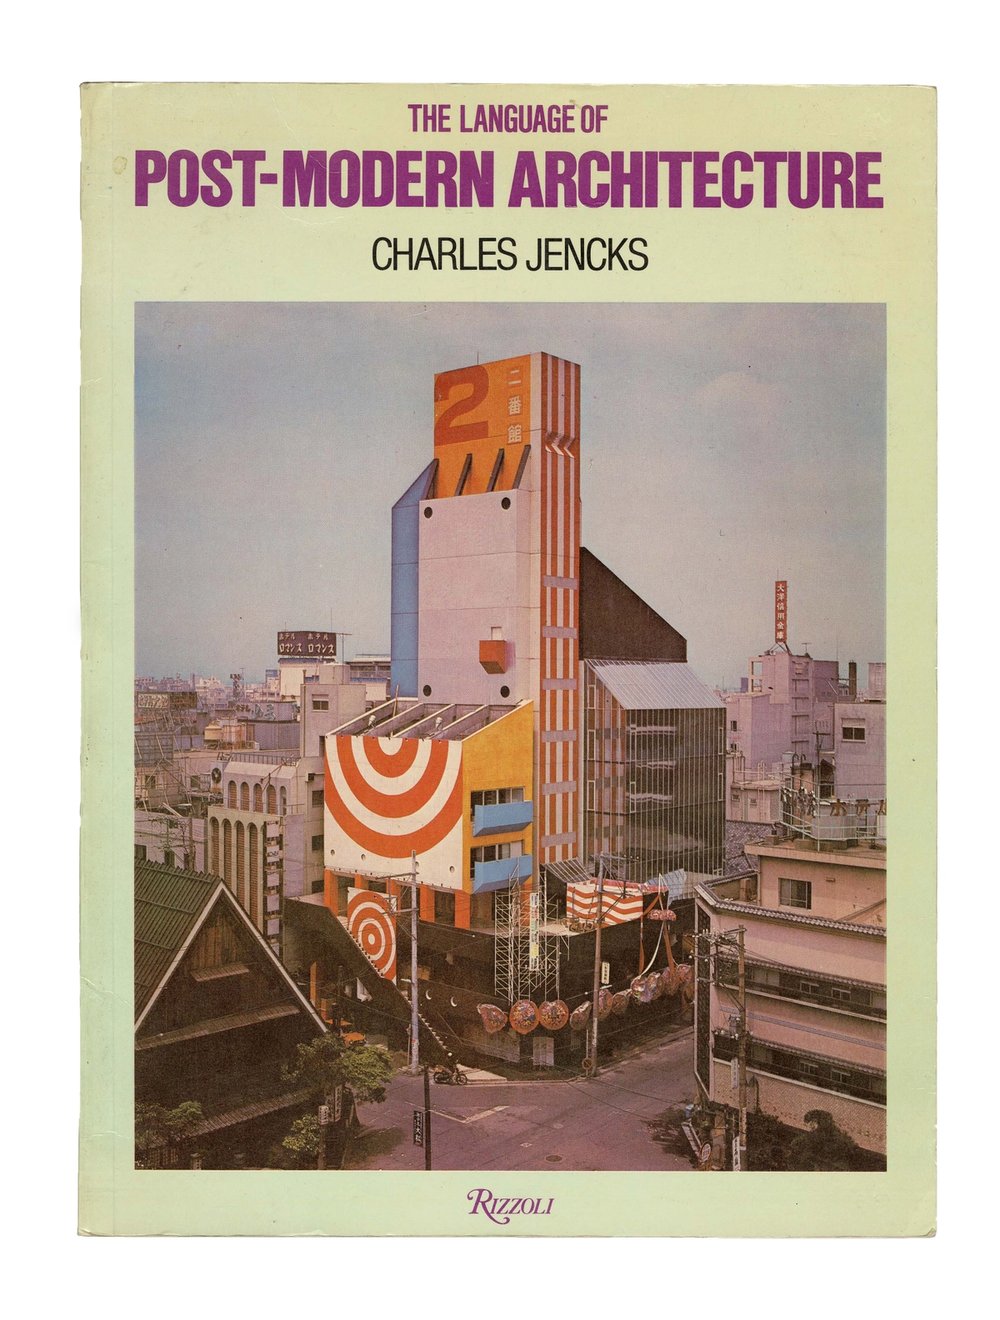 Charles Jencks, The Language of Post-Modern Architecture (1977) (book cover)